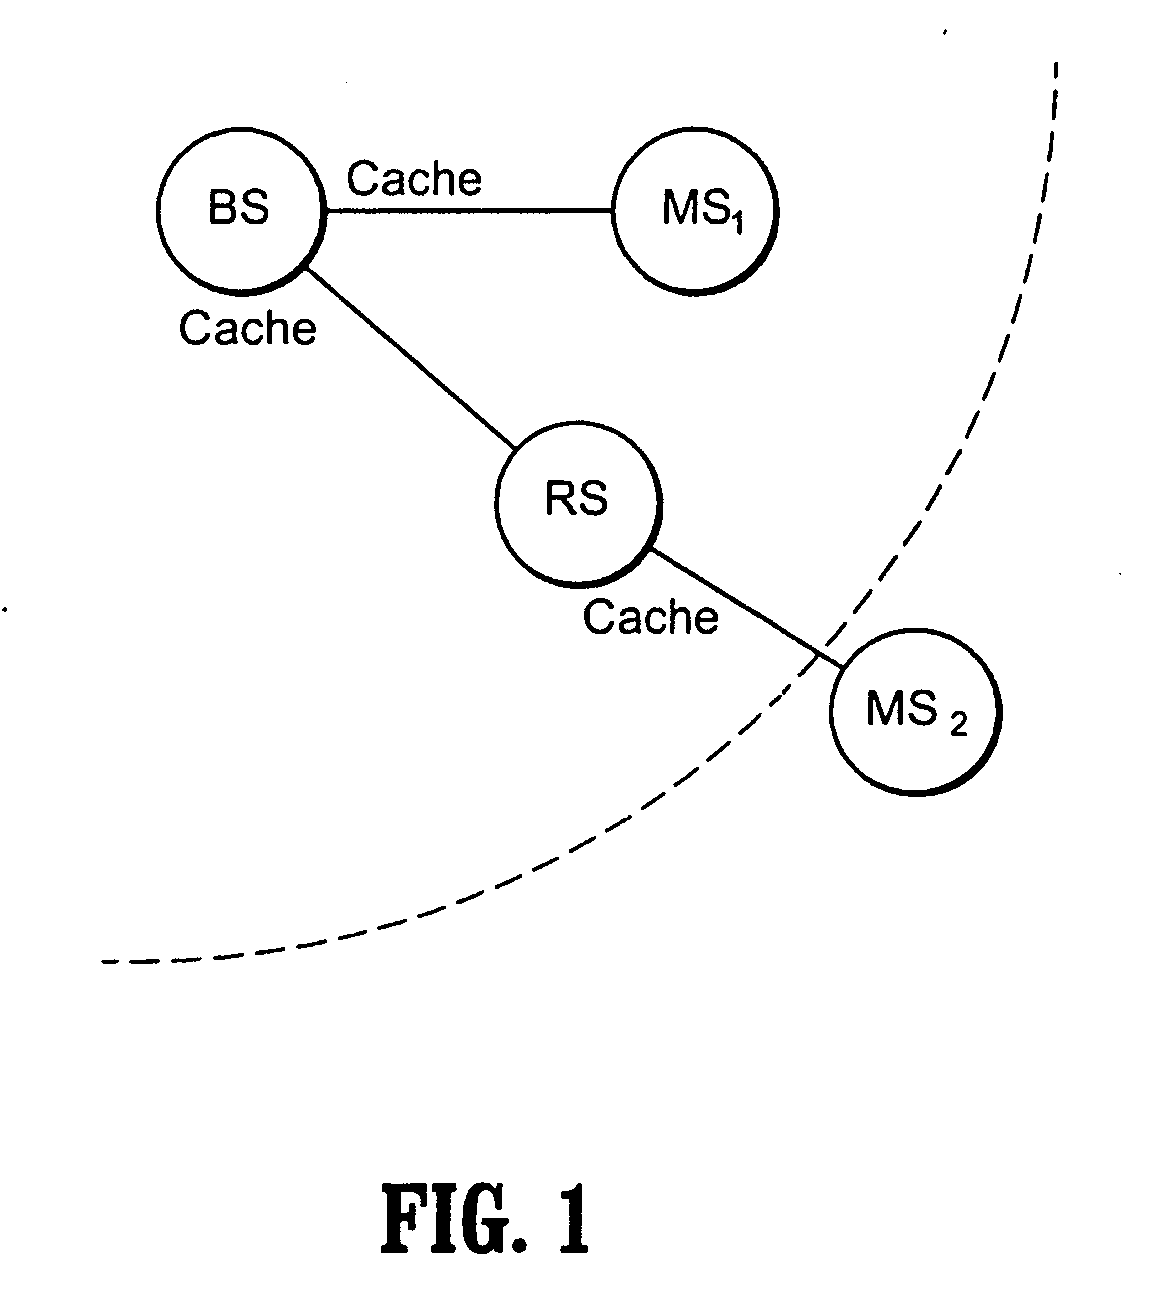 Route maintenance and update based on connection identifier in multi-hop relay systems